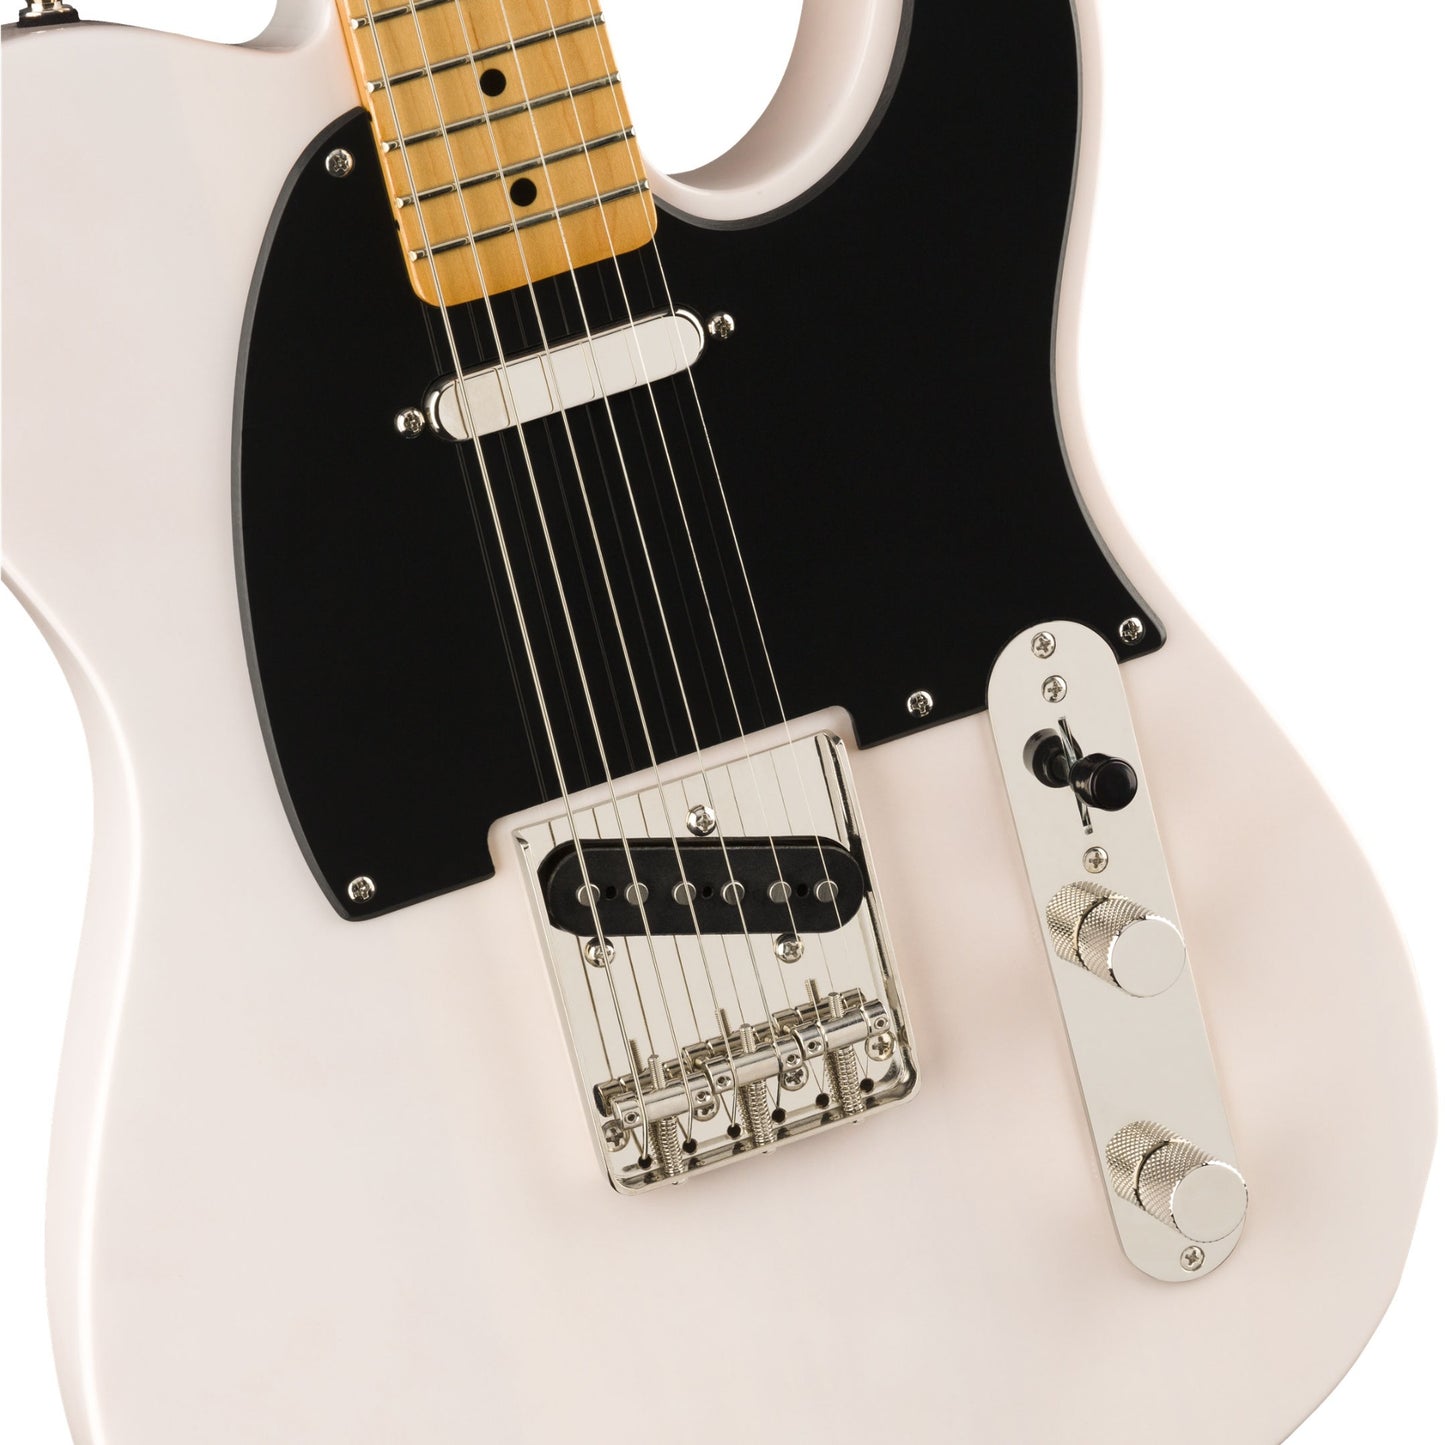 Squier Classic Vibes 50’s Telecaster in White Blonde